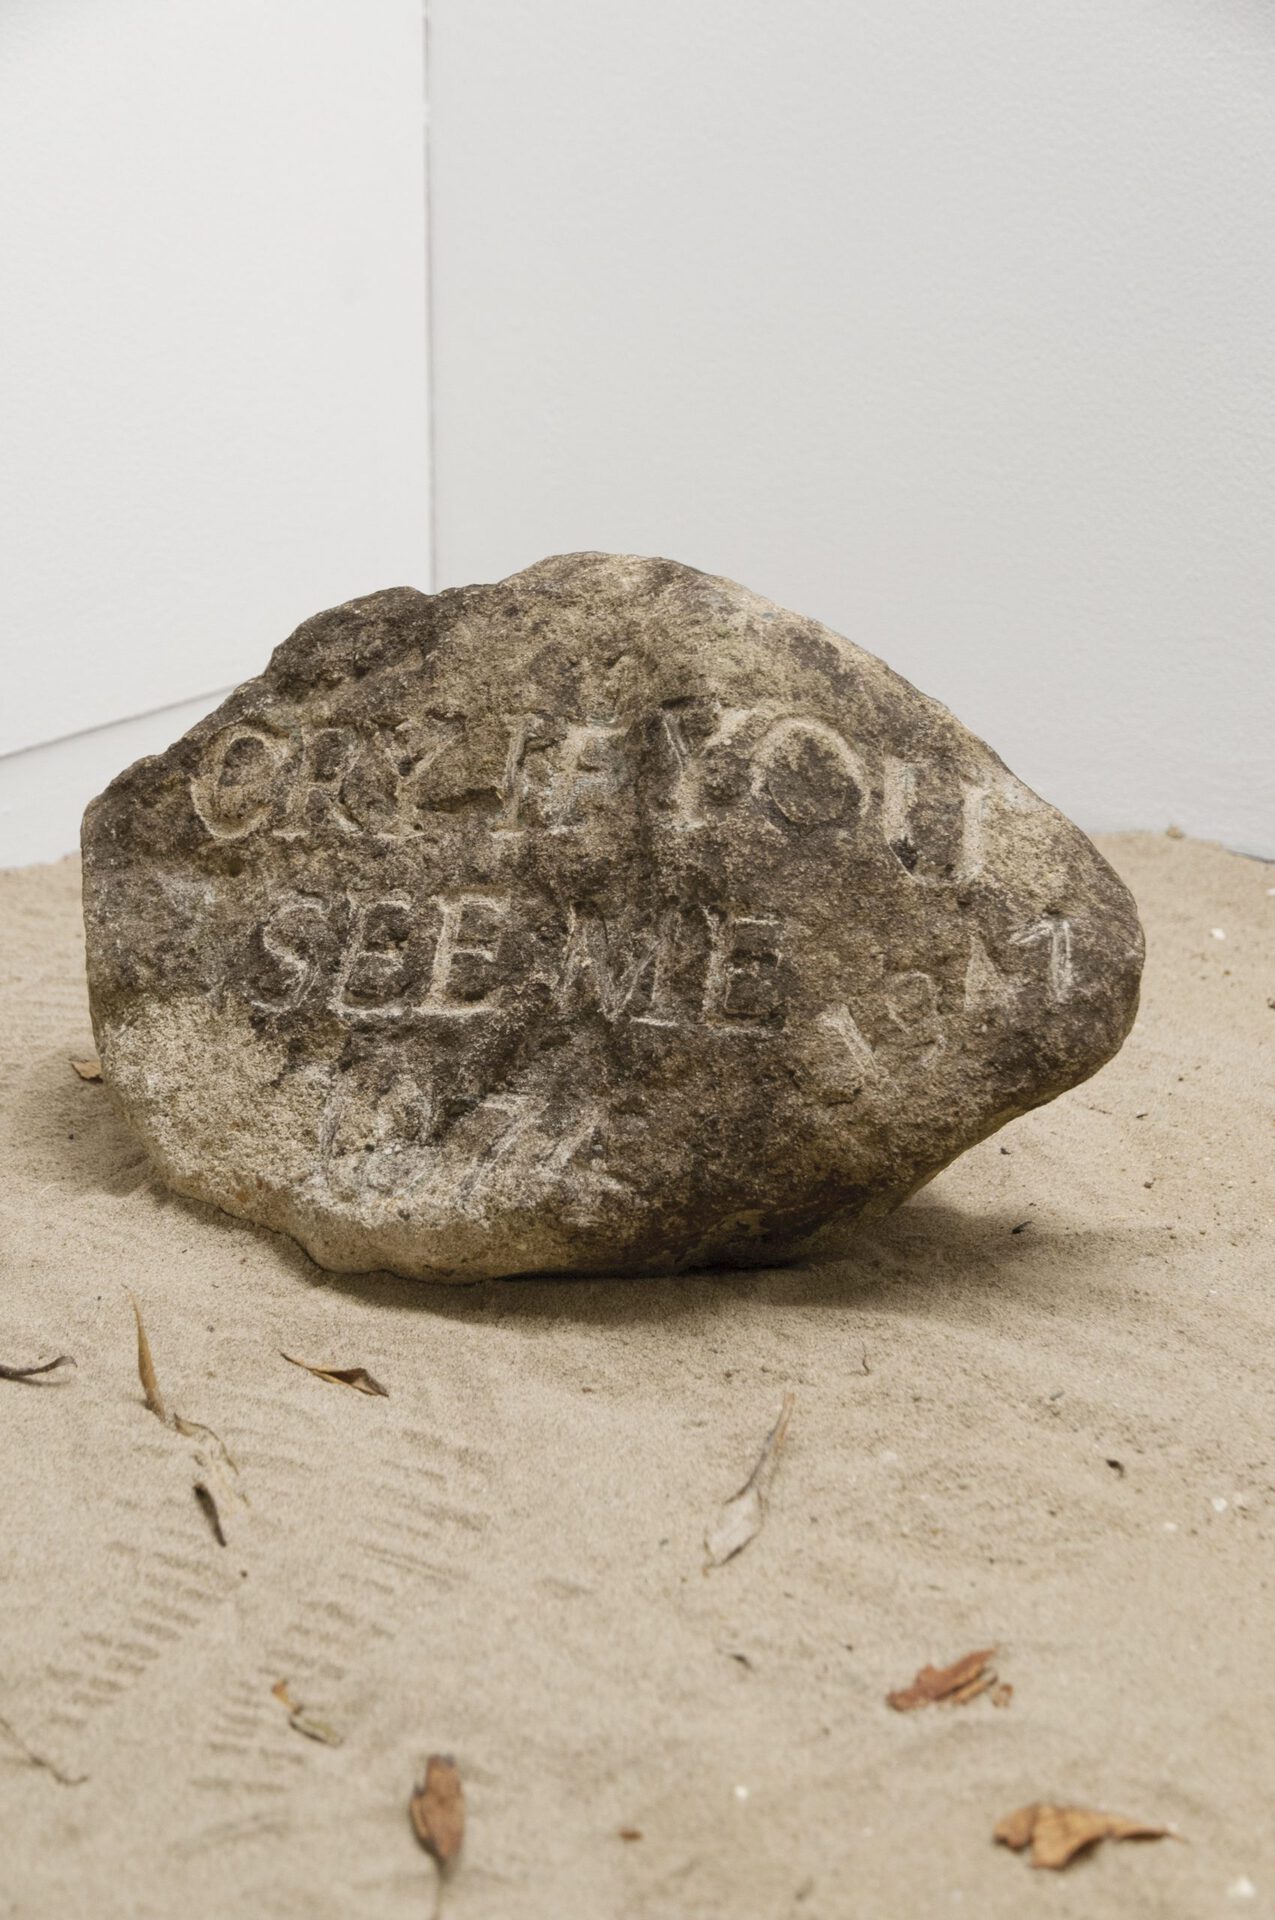 Finn Wagner, cry if you see me, 2021, stone, 49x46x25cm